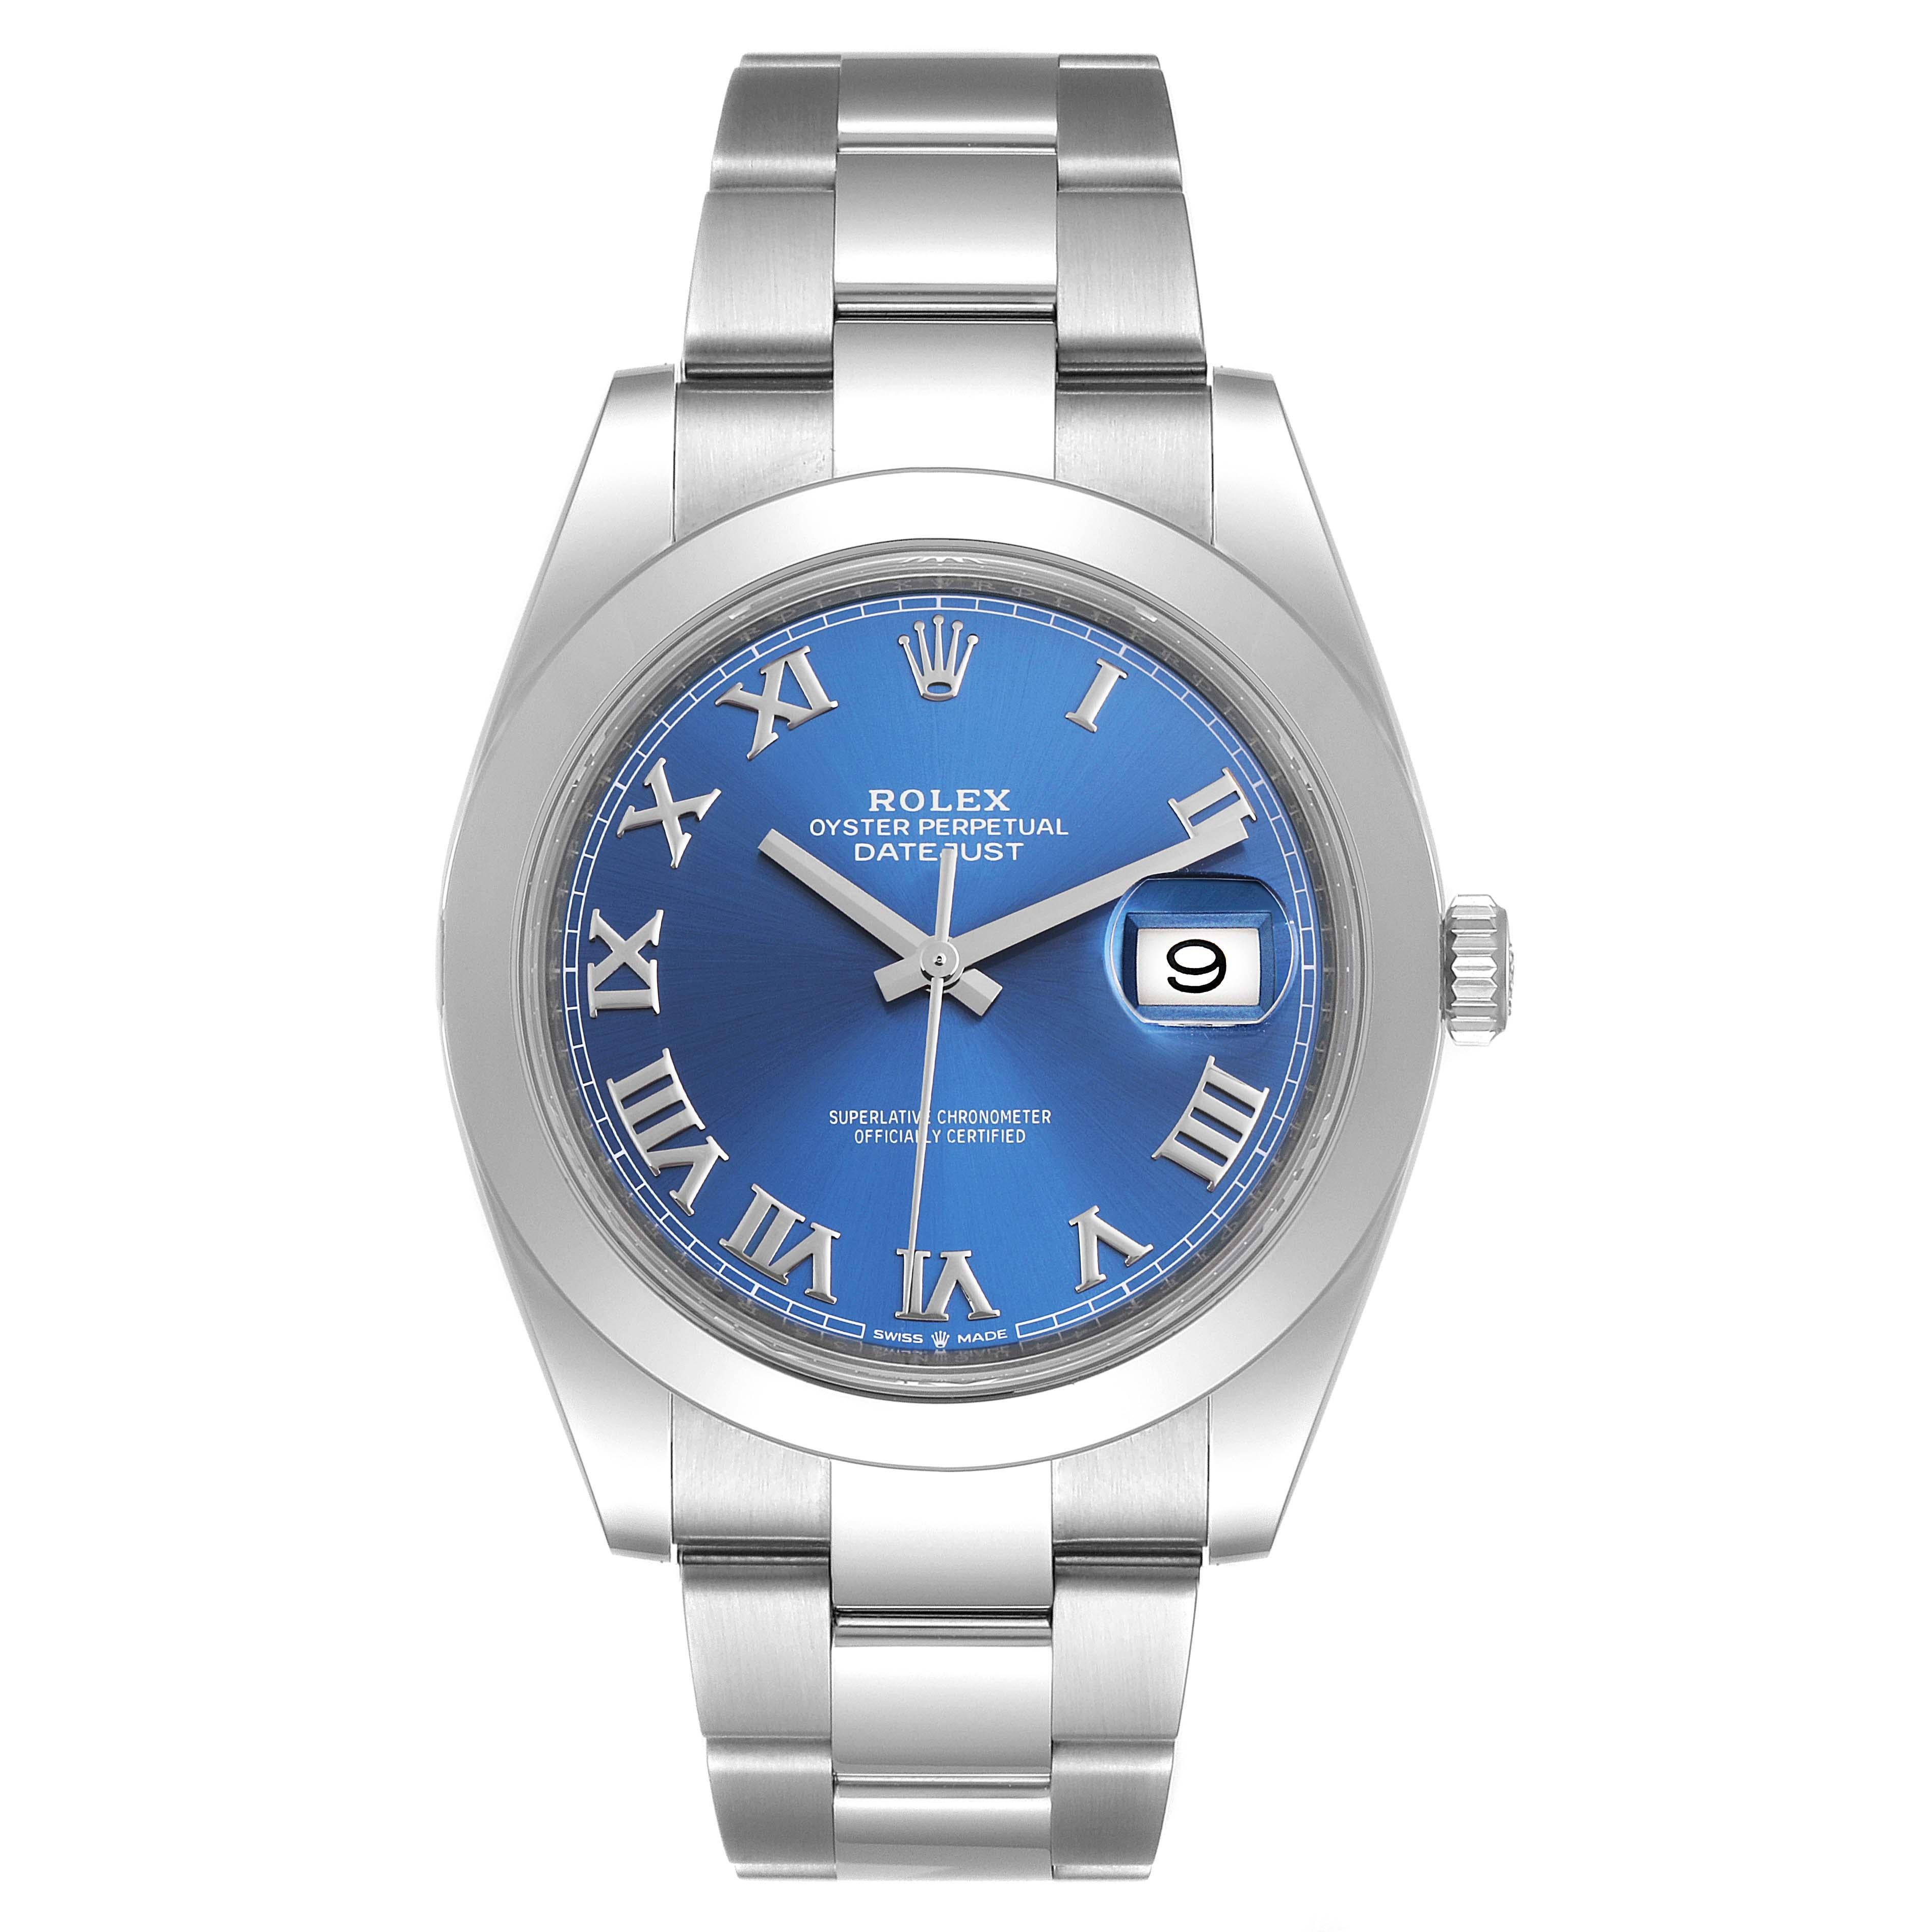 Rolex Datejust 41 Blue Dial Steel Mens Watch 126300 Box Card. Officially certified chronometer automatic self-winding movement. Stainless steel case 41 mm in diameter. Rolex logo on a crown. Stainless steel smooth domed bezel. Scratch resistant